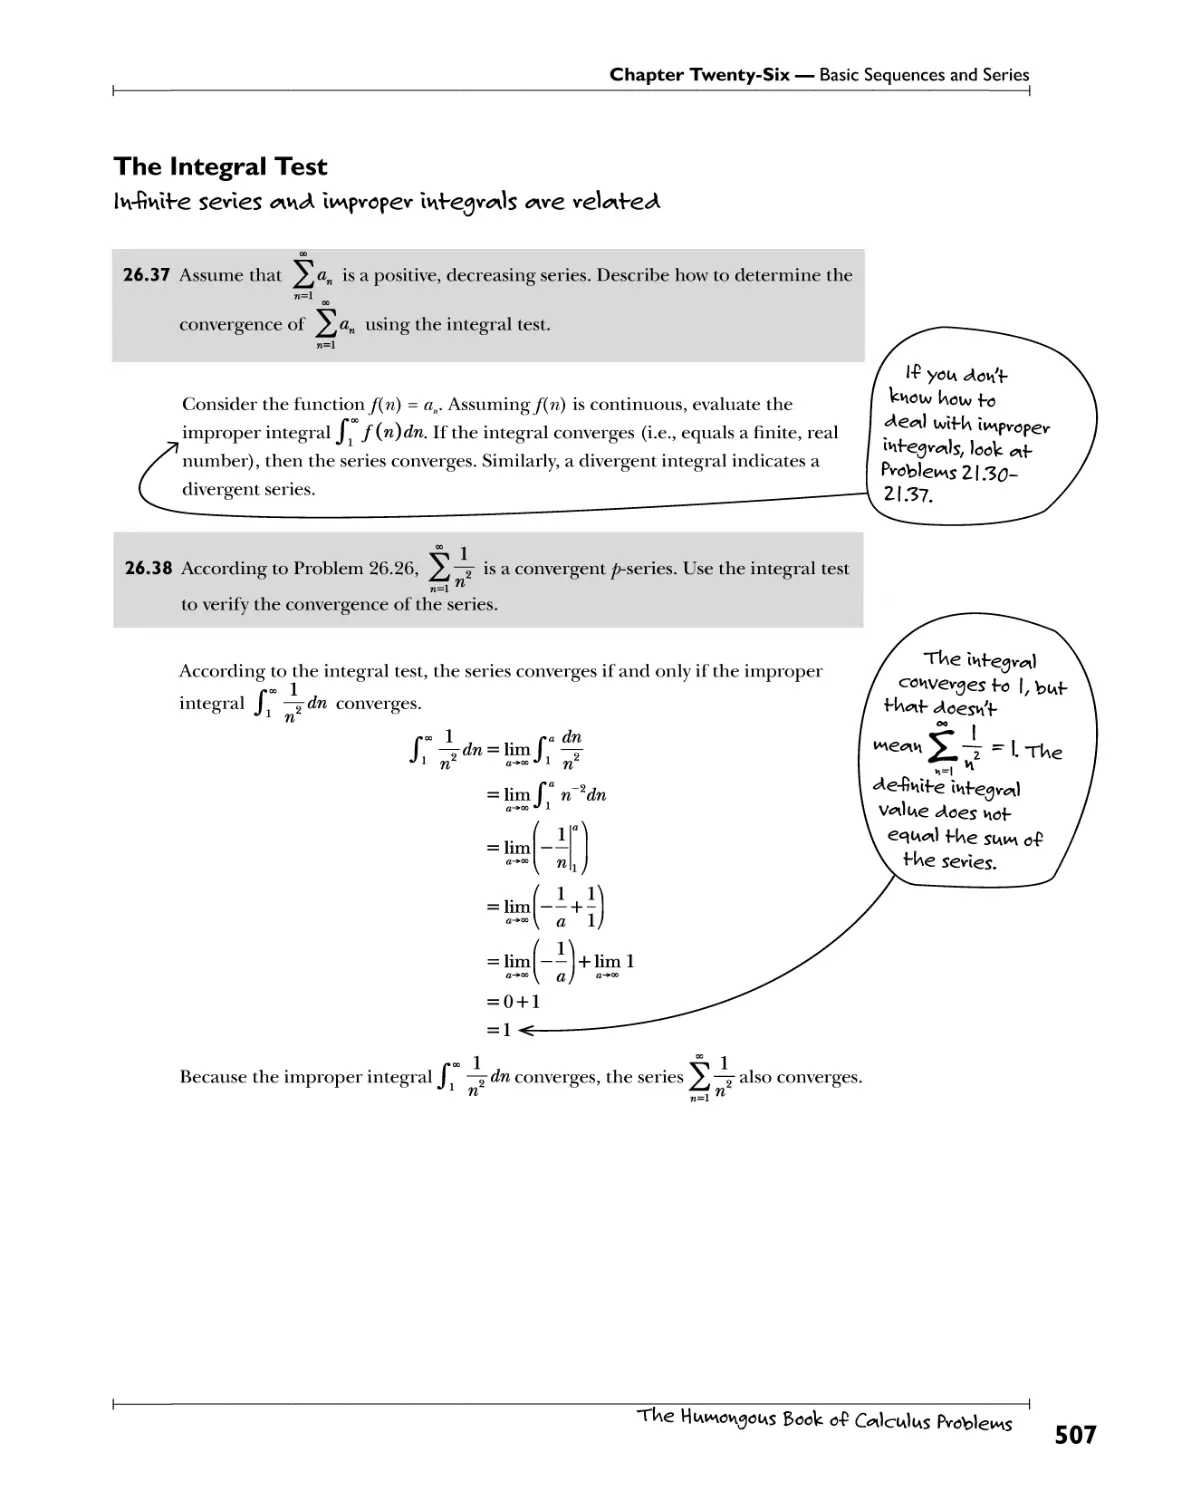 The Integral Test 507